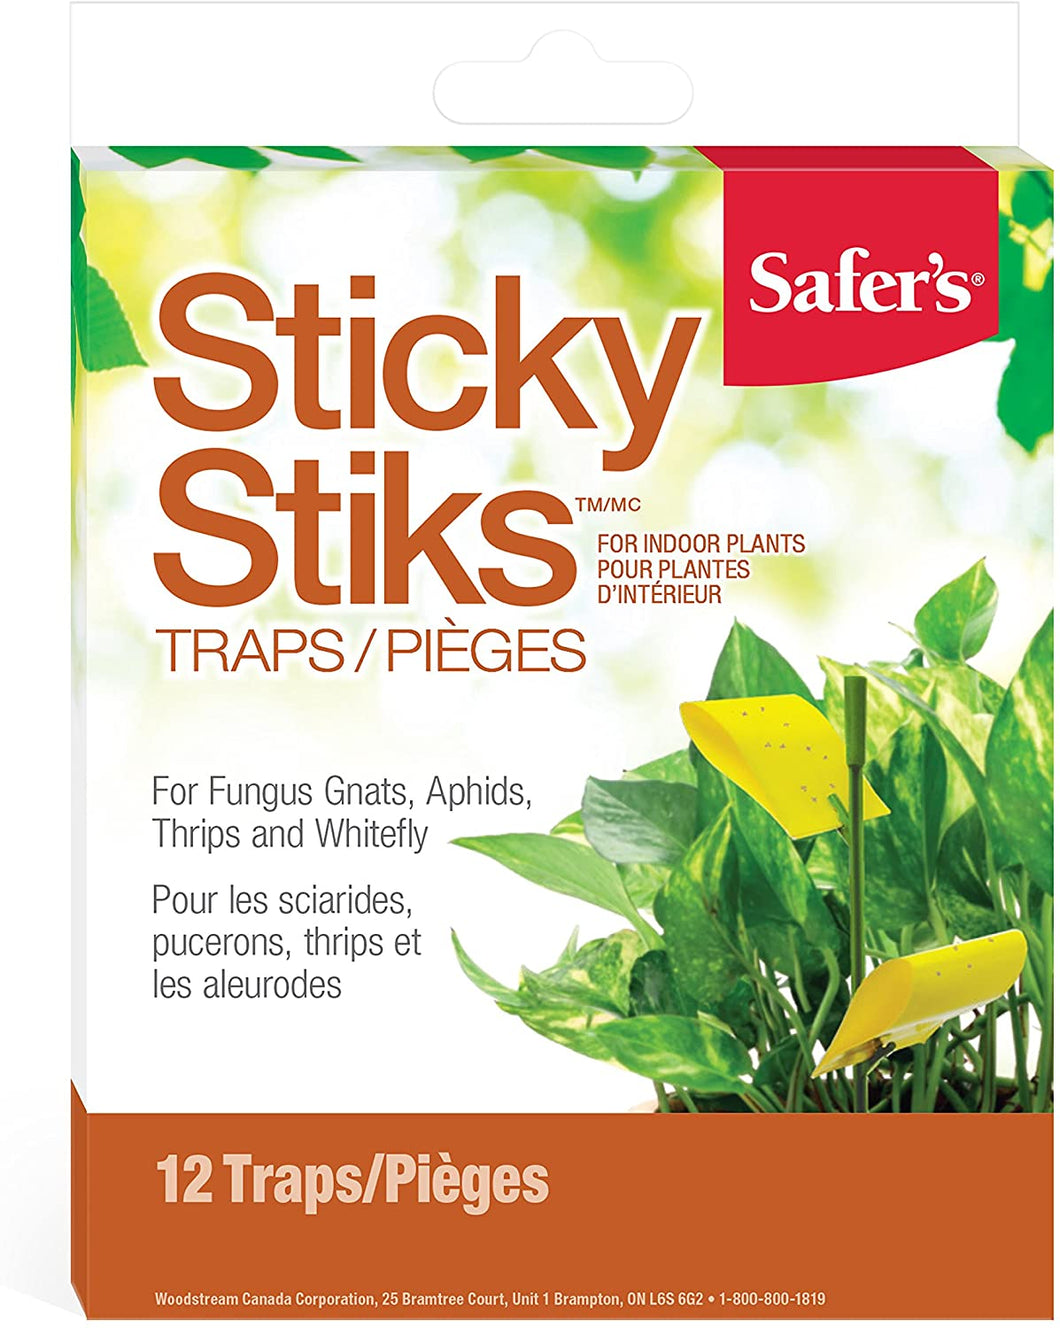 CHS Safer's Stricky Stiks Fungus Gnat Traps 12/Tray attracts and traps whiteflies, fungus gnats, blackflies, thrips, fruit flies, midges and other flying insects, no pesticide natural pest control